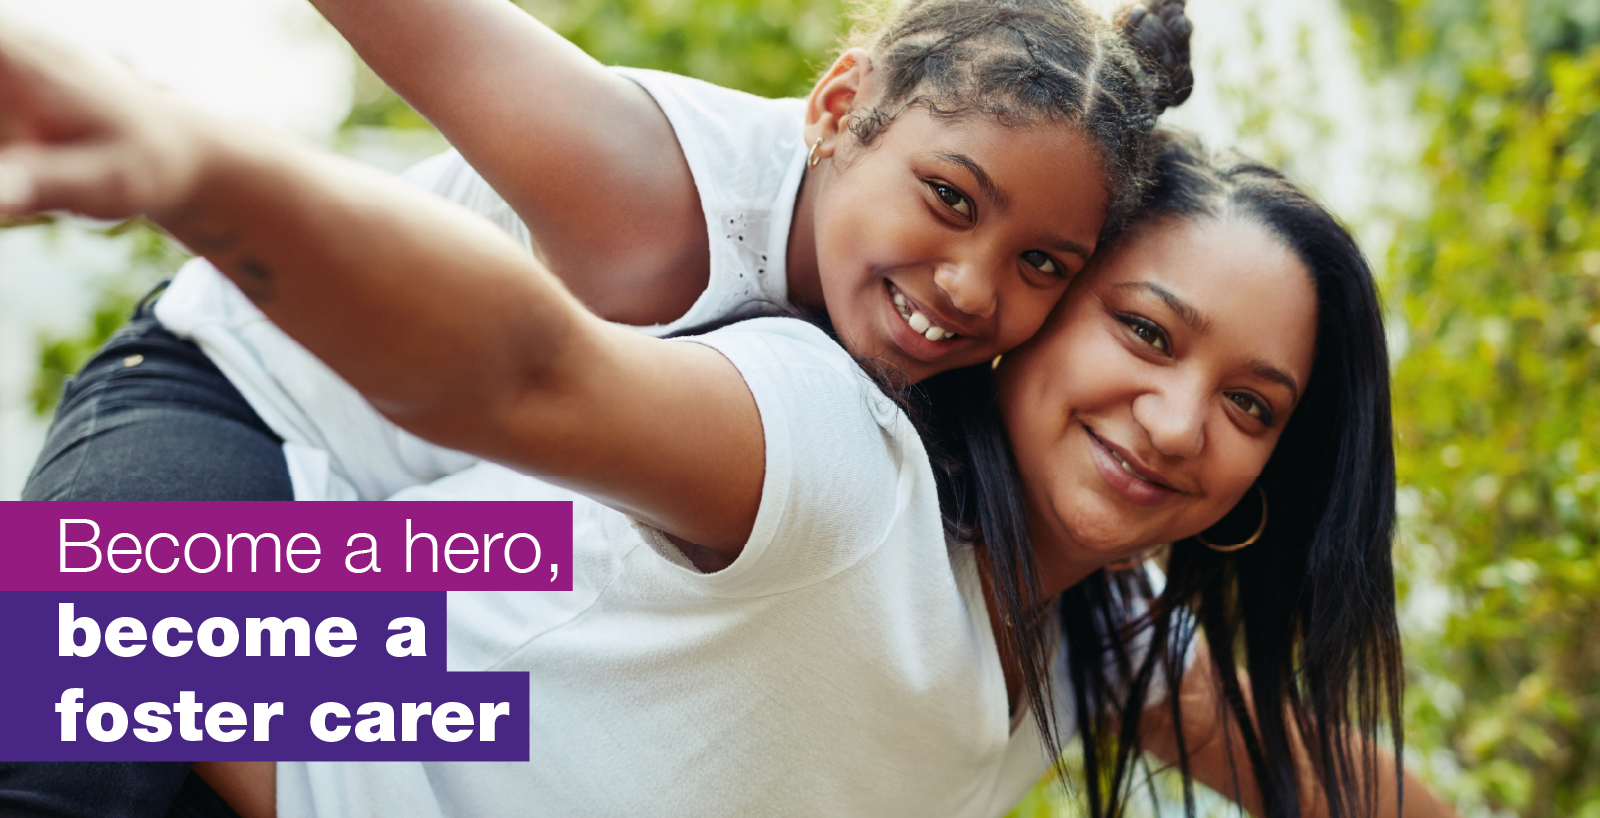 Become a foster carer, become a hero